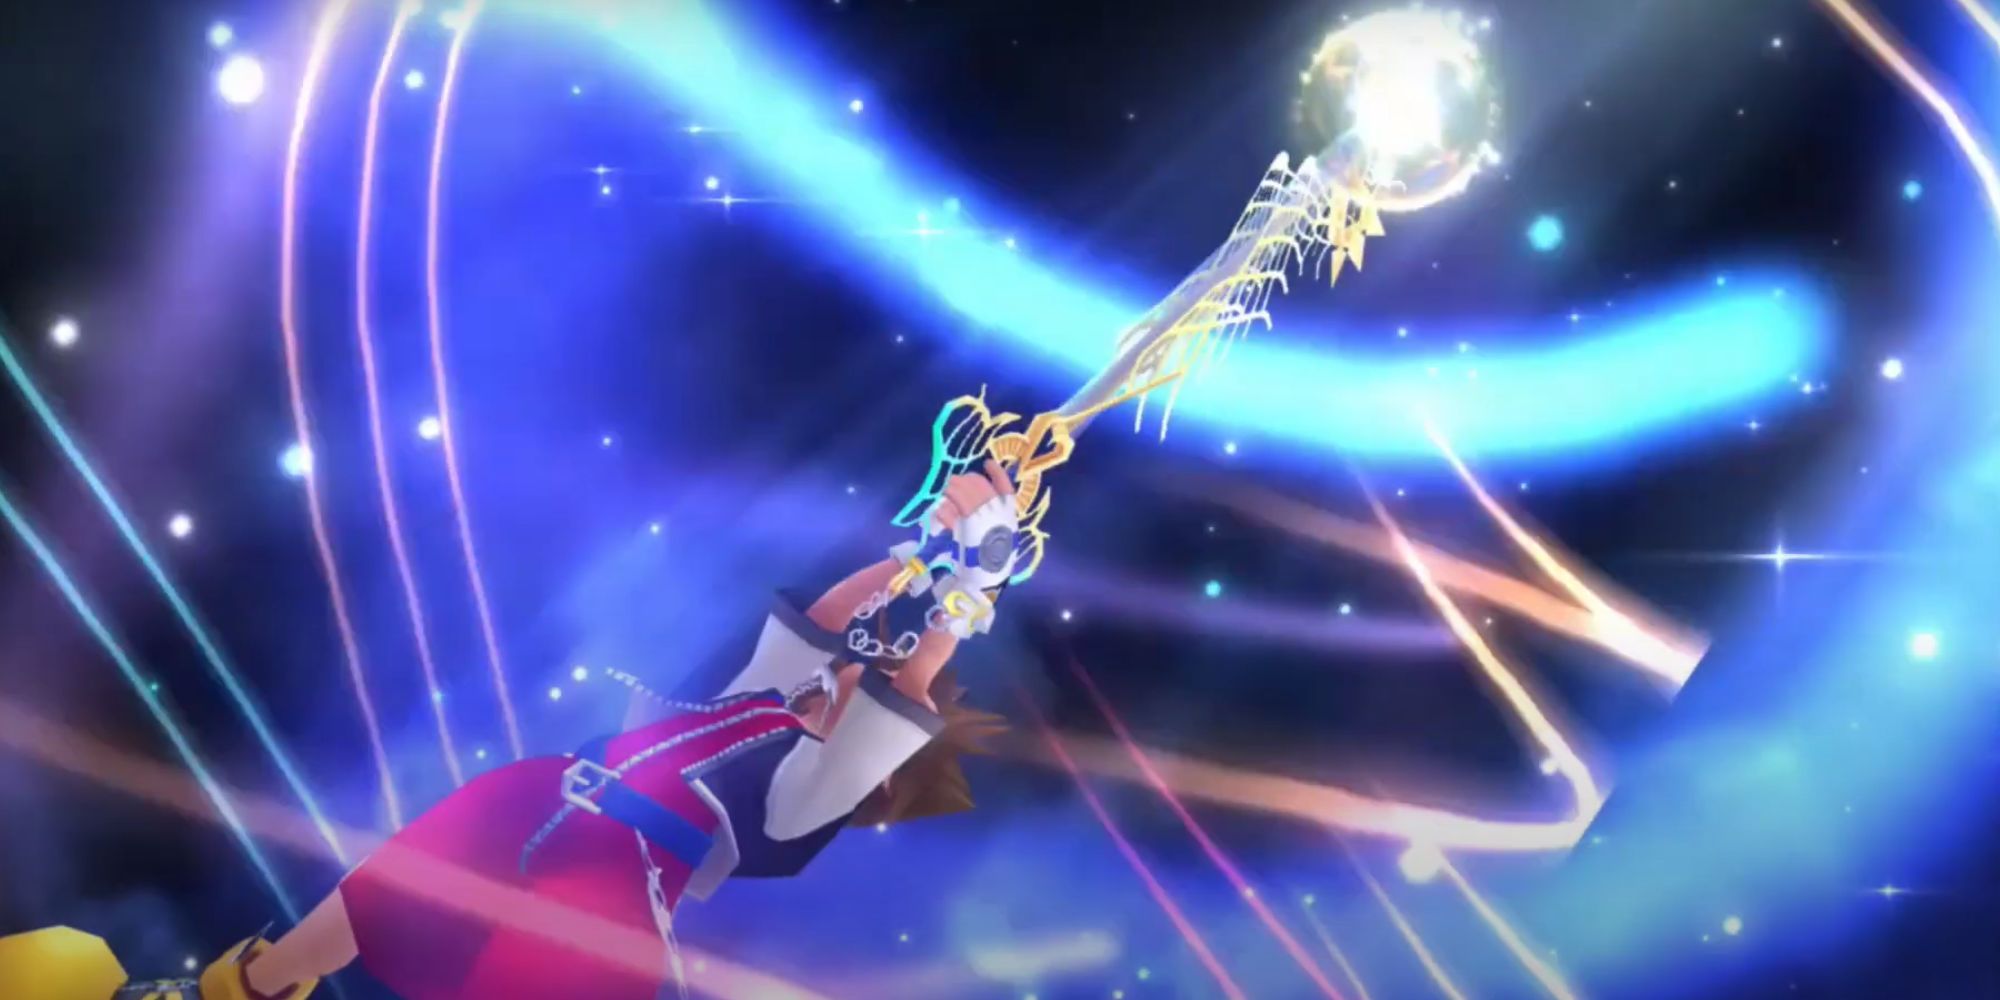 Sora pointing his Keyblade up with both hands to summon in Kingdom Hearts.